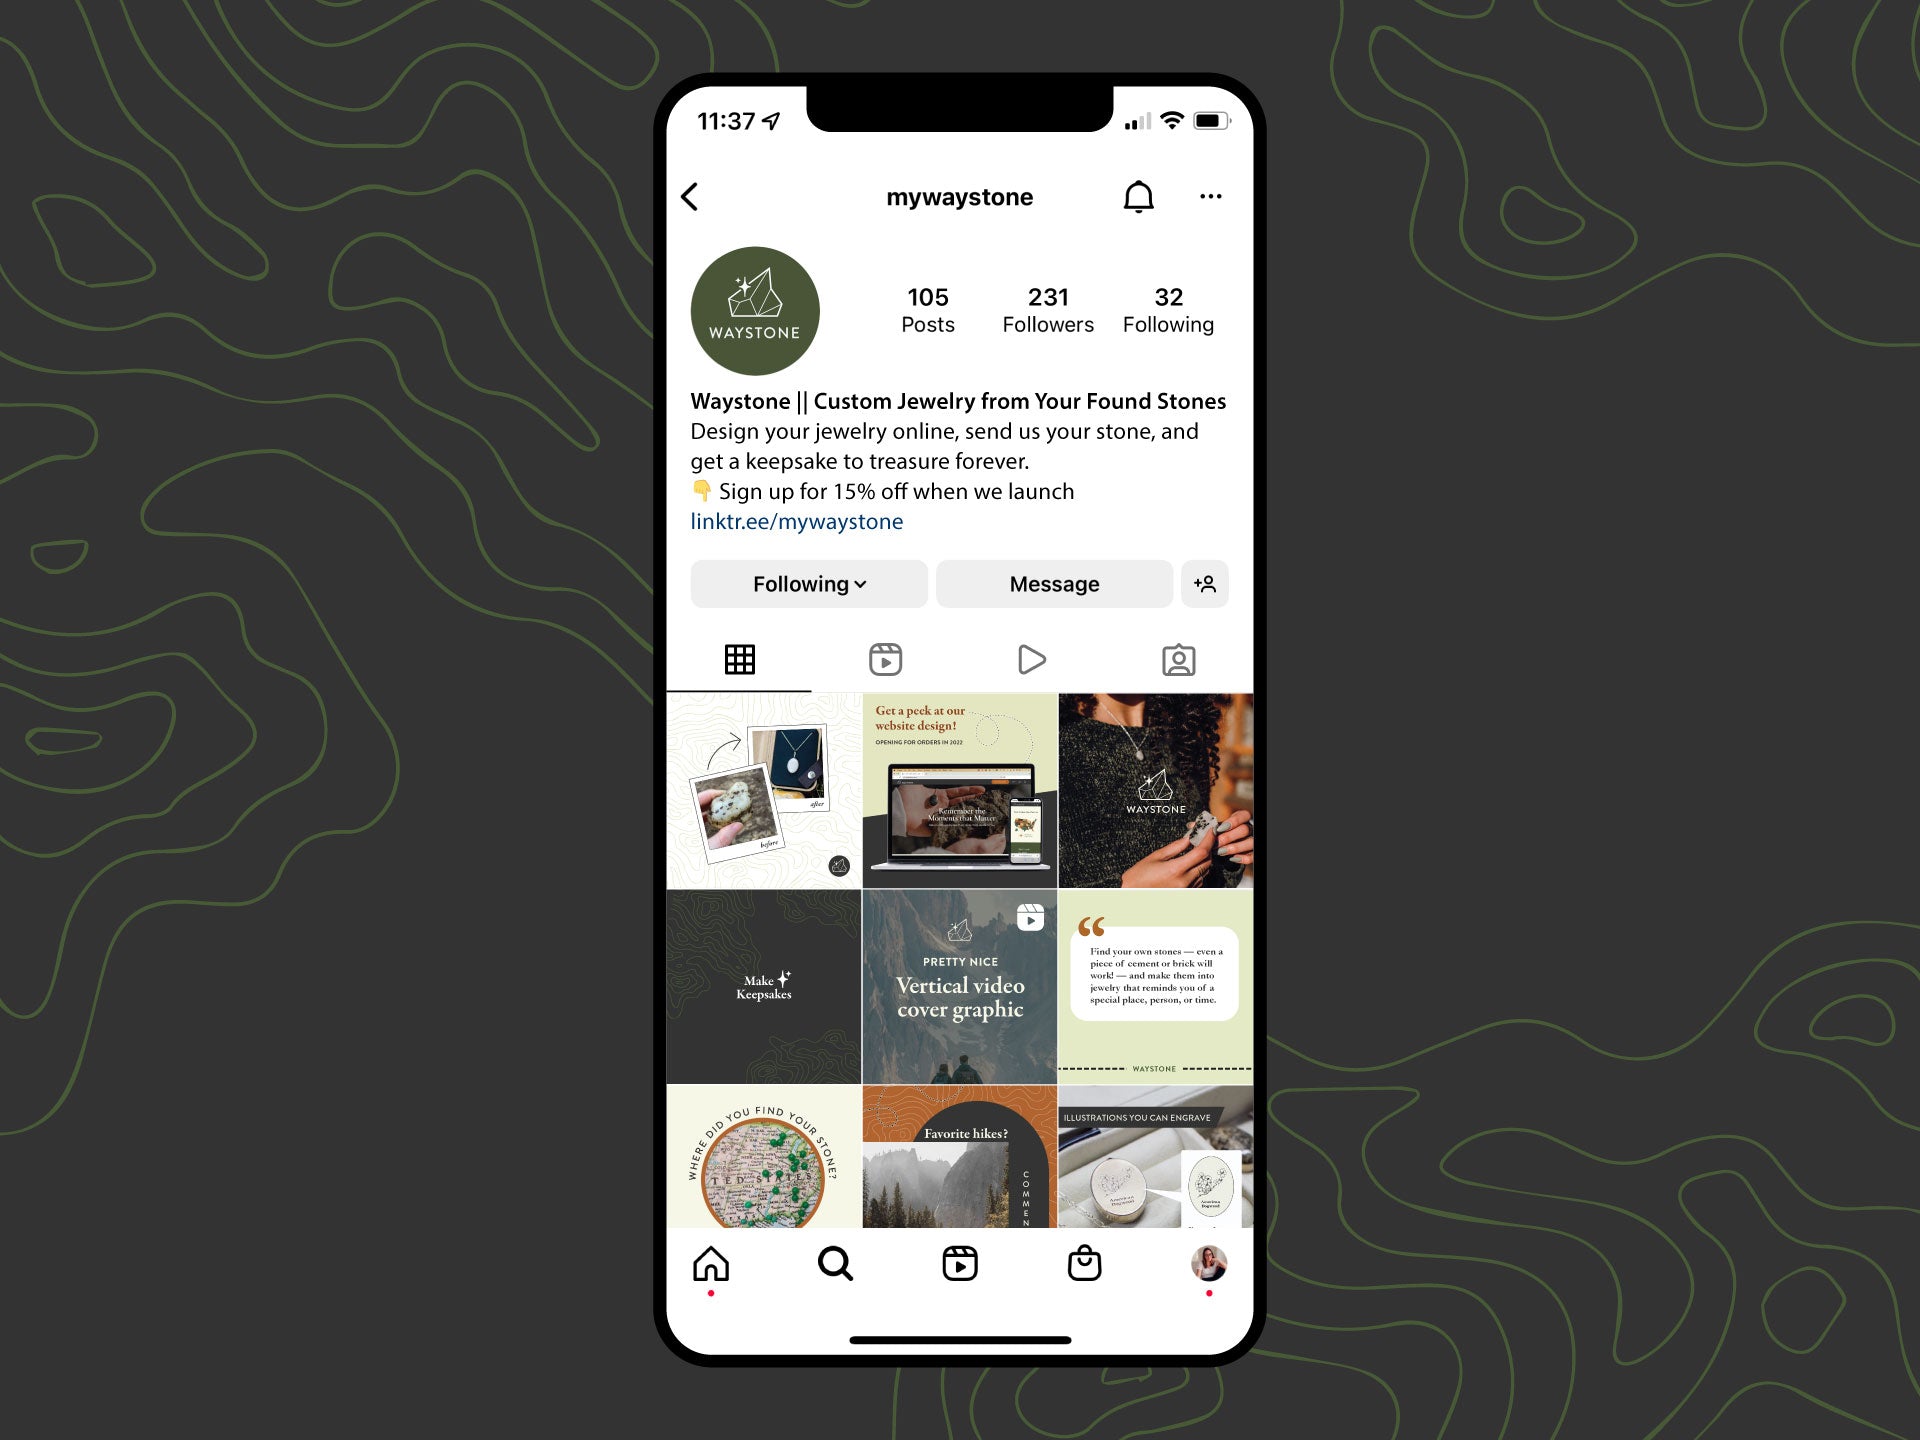 A mockup of Waystone's Instagram profile page